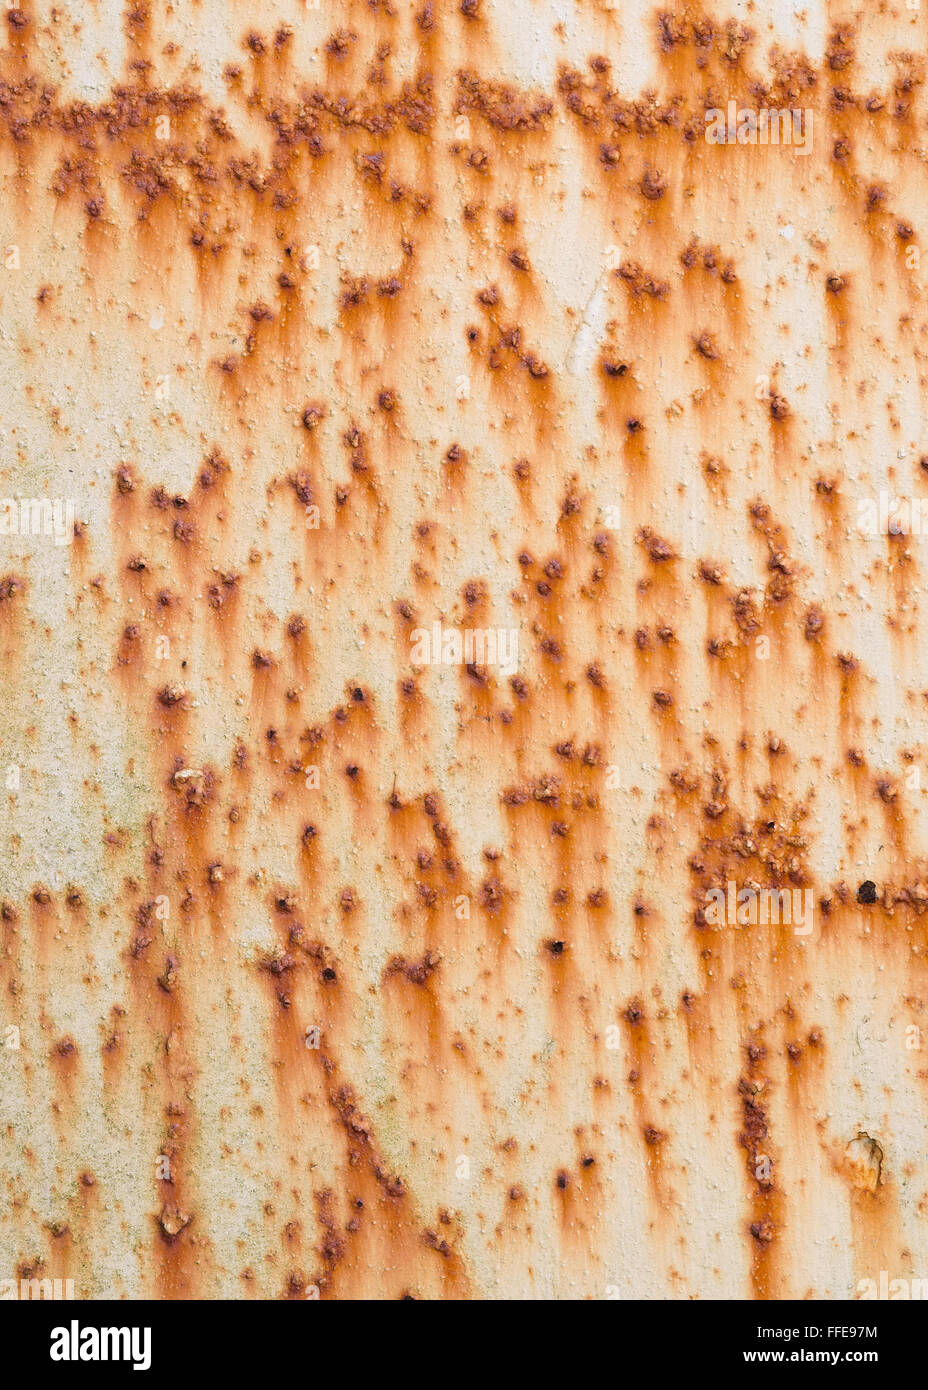 Lots of rust spots and marks on white painted metal surface. Stock Photo